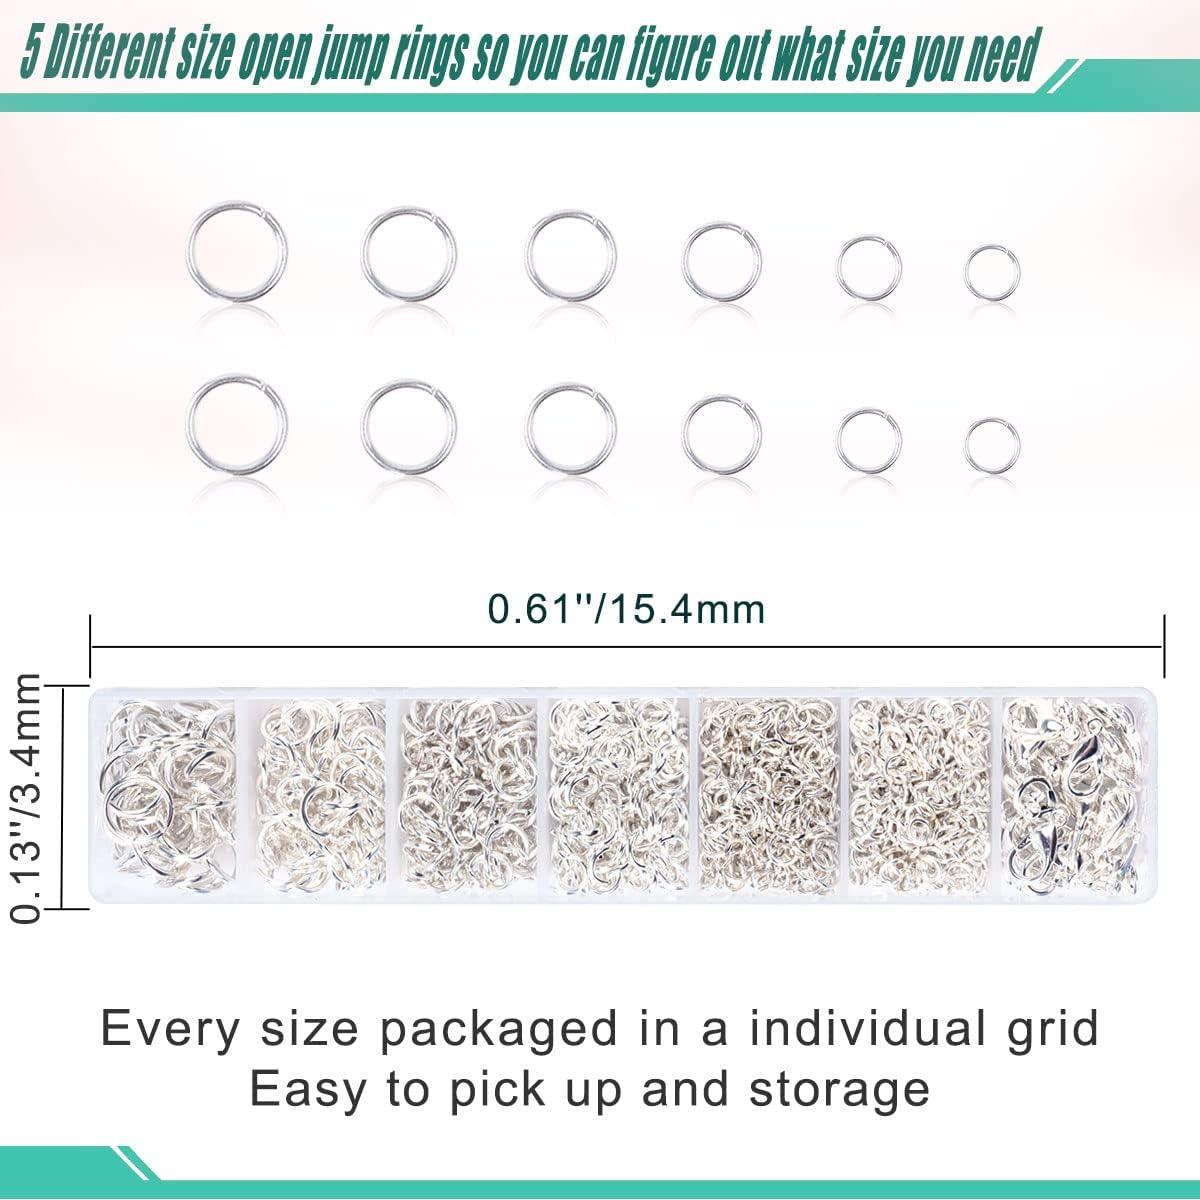 YUGDRUZY Jump Rings for Jewelry Making Kit, 1200 Pcs Open Jump Rings Jewelry Repair Kit for Necklace Bracelet, Lobster Clasps and Closures Repair